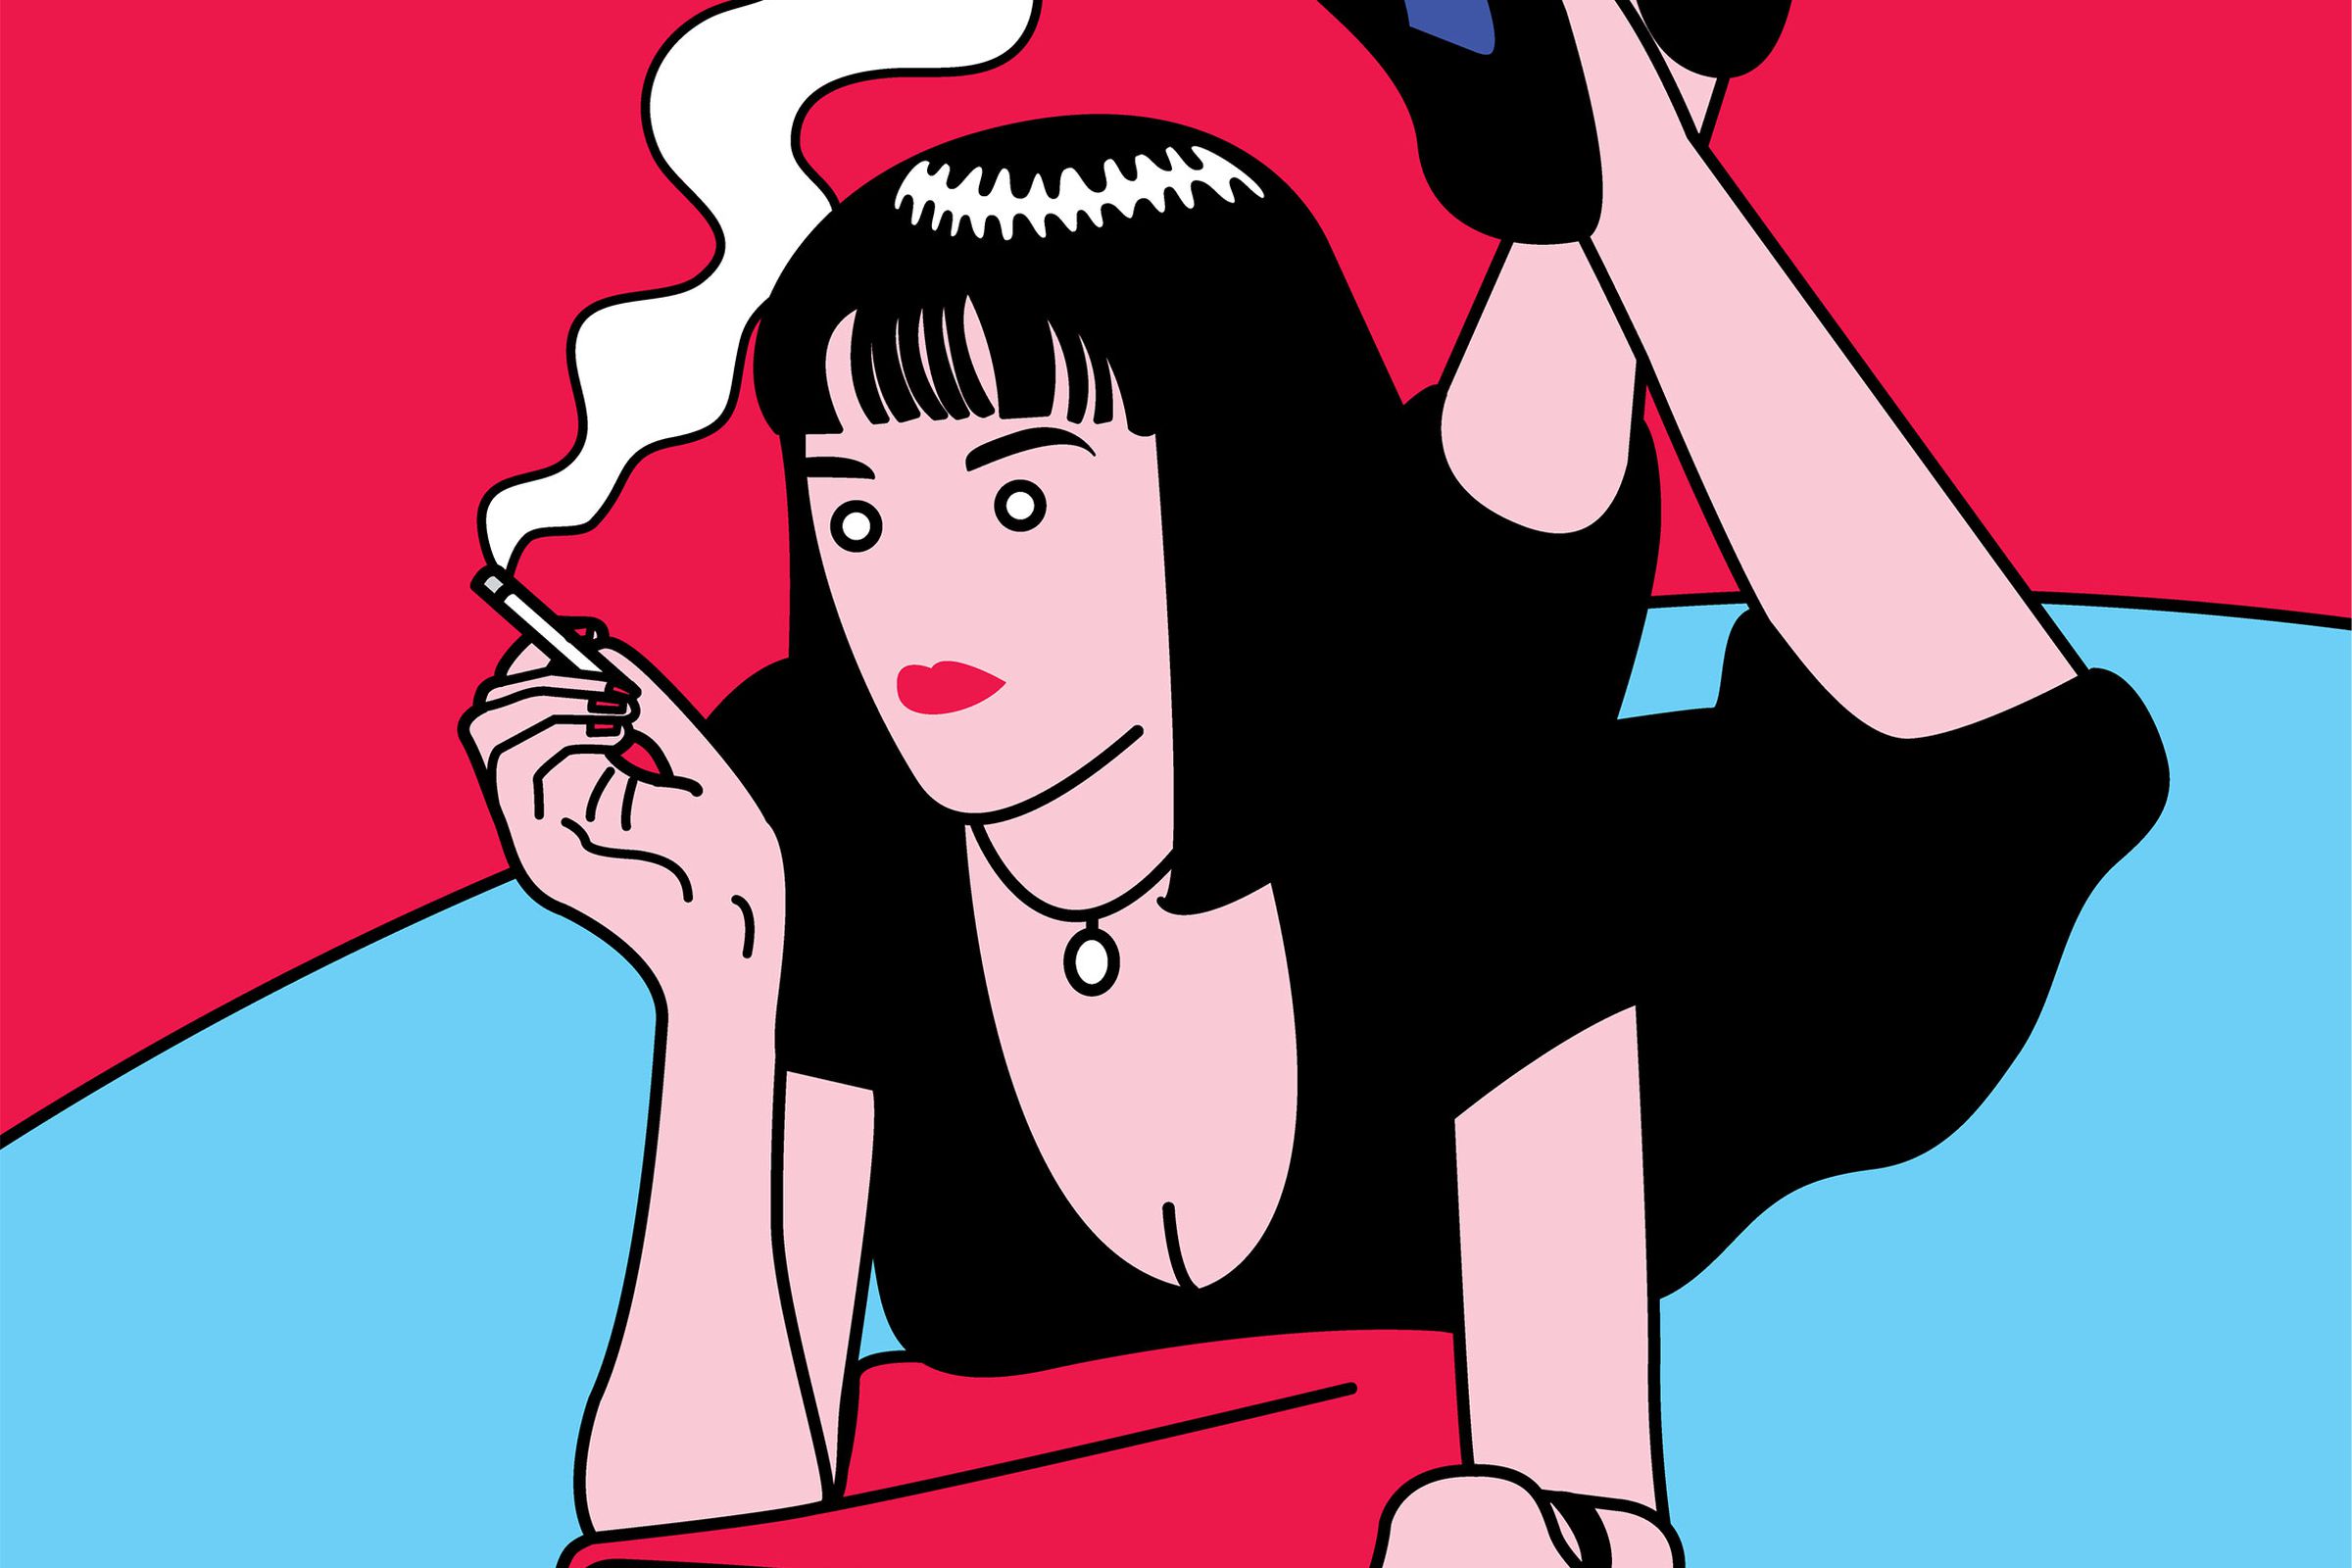 A cartoon drawing based on Uma Thurman in Pulp Fiction. She is laying on her stomach with her legs crossed behind her as she smokes a cigarette.